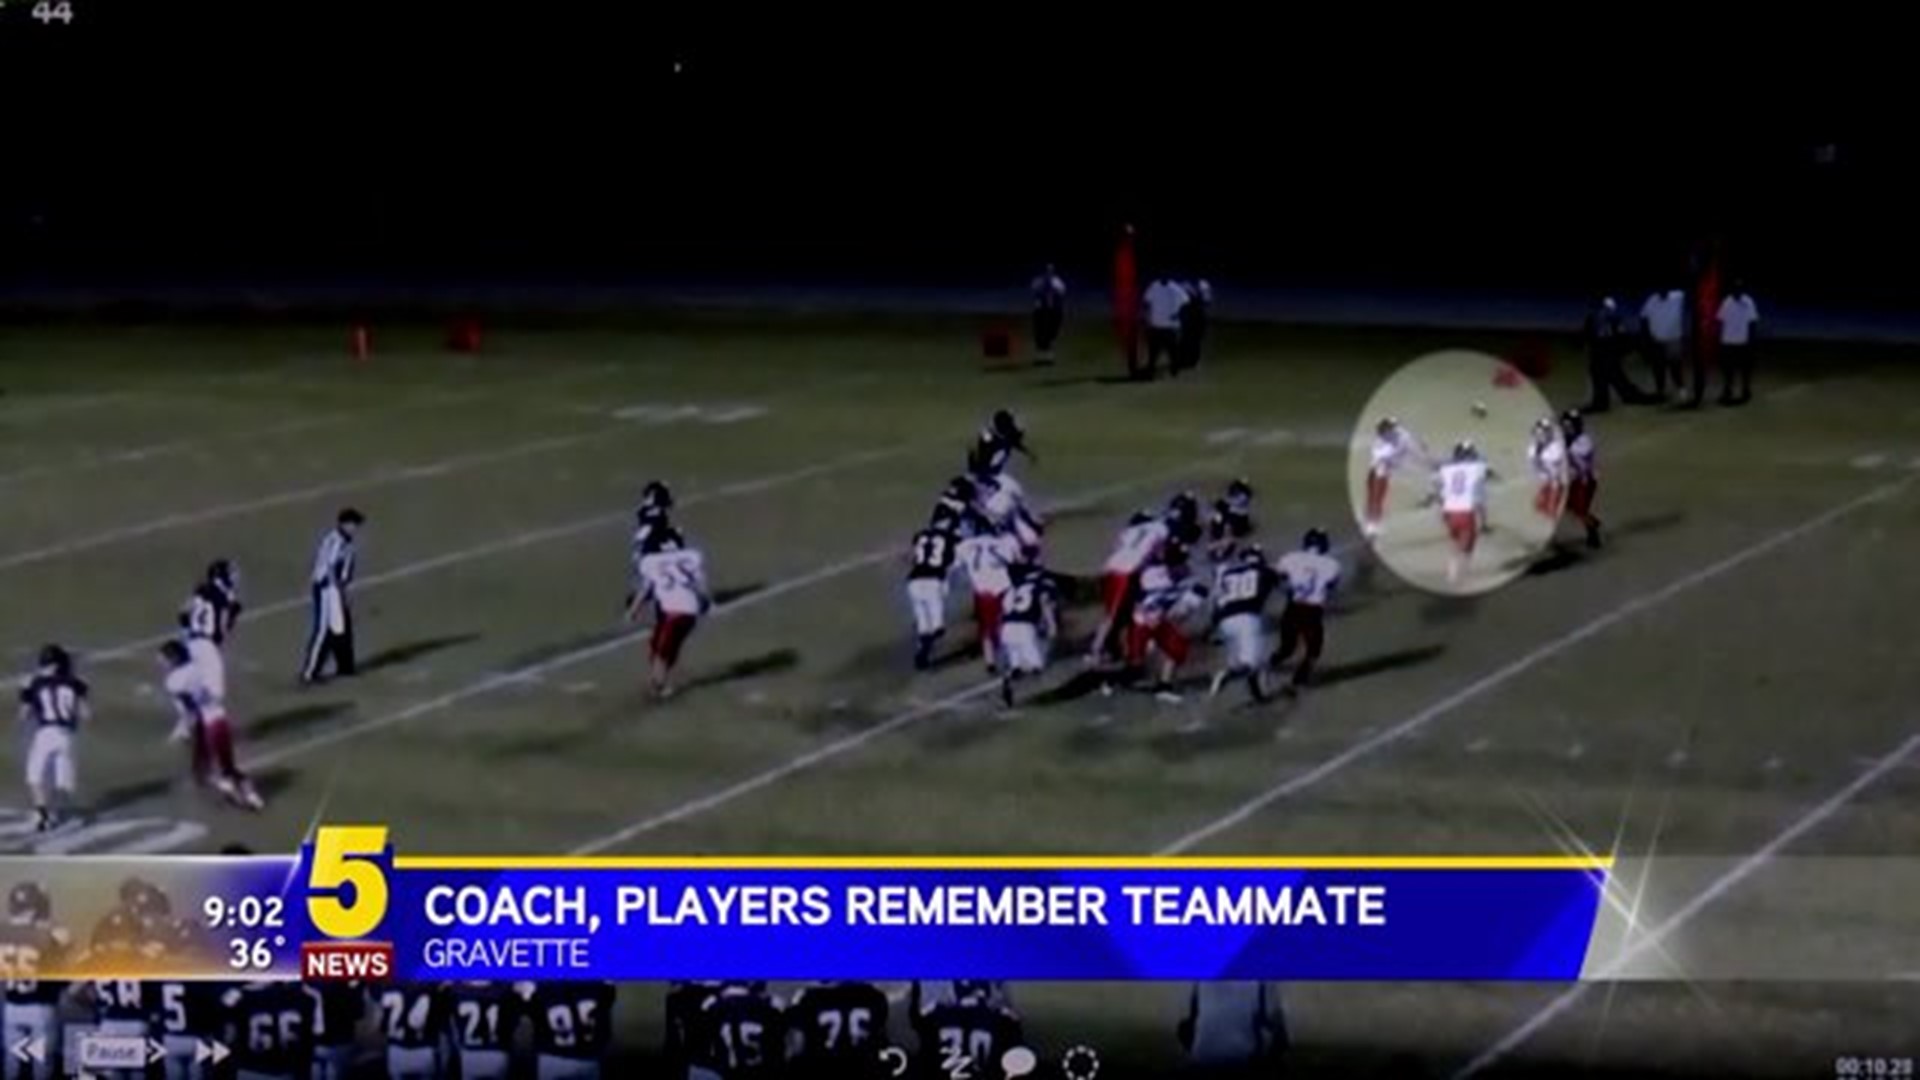 GRAVETTE FOOTBALL PLAYERS AND COACH REMEMBER TEAMMATE